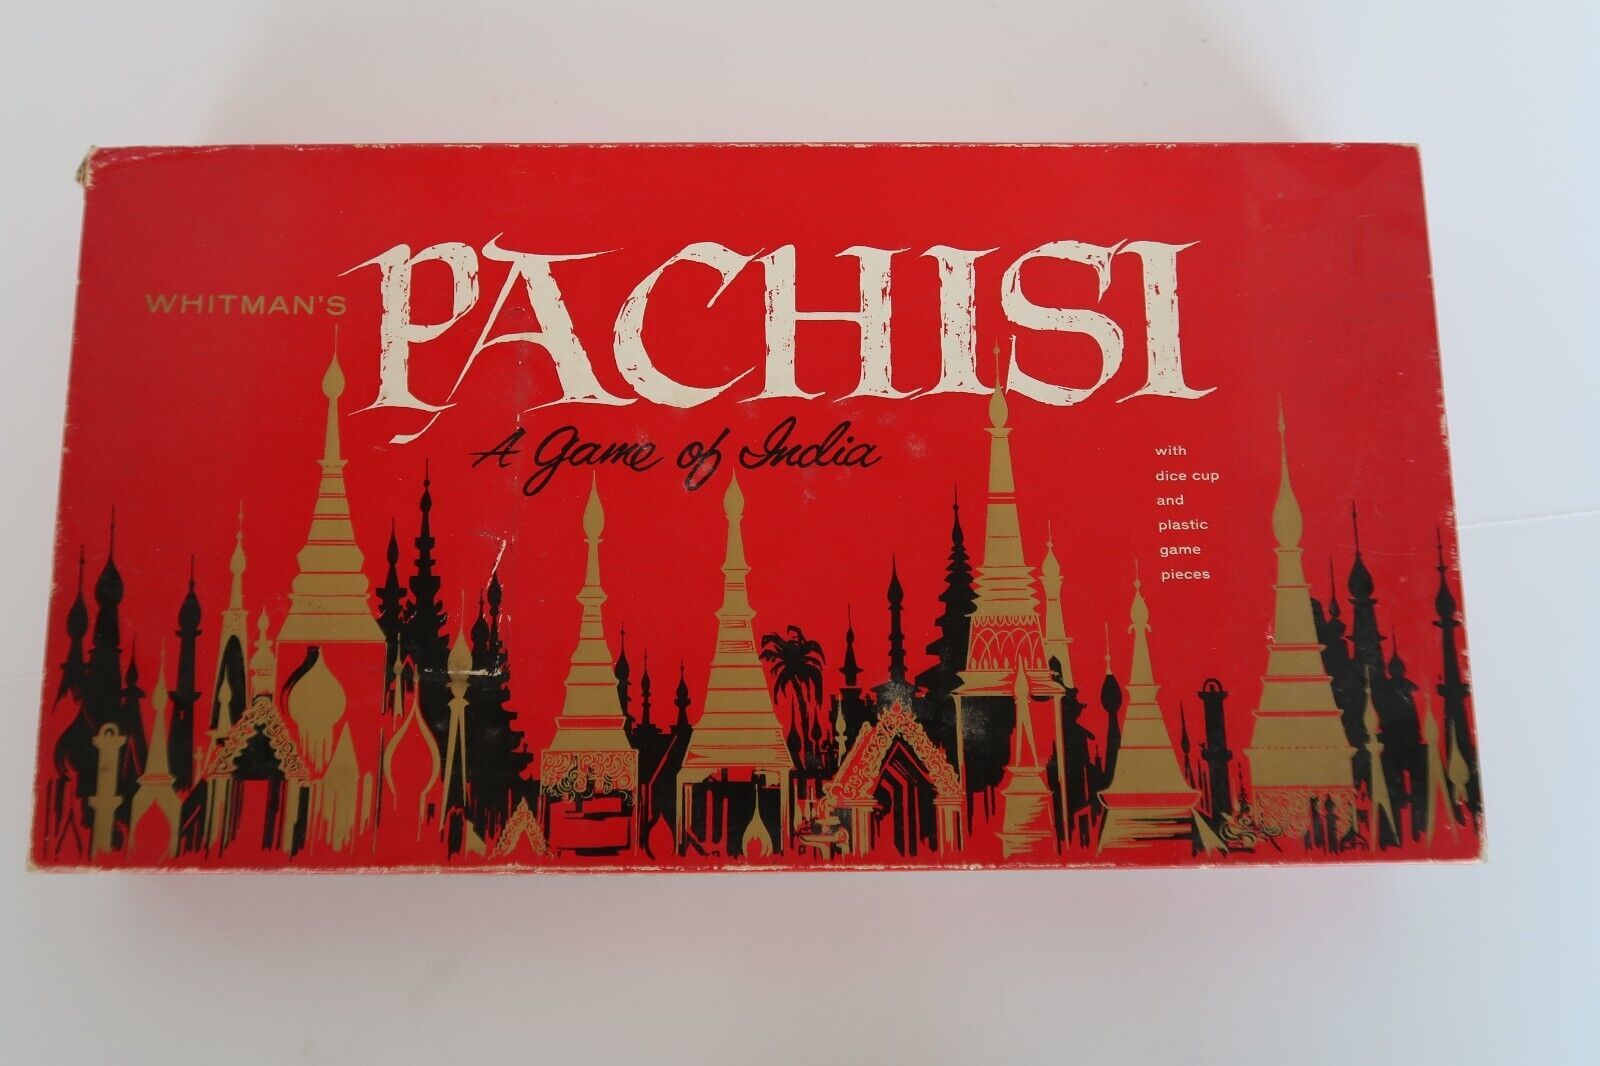 Vtg Whitman's Pachisi Game of India Parcheesi Board Game Copyright 1945 Complete - $25.00